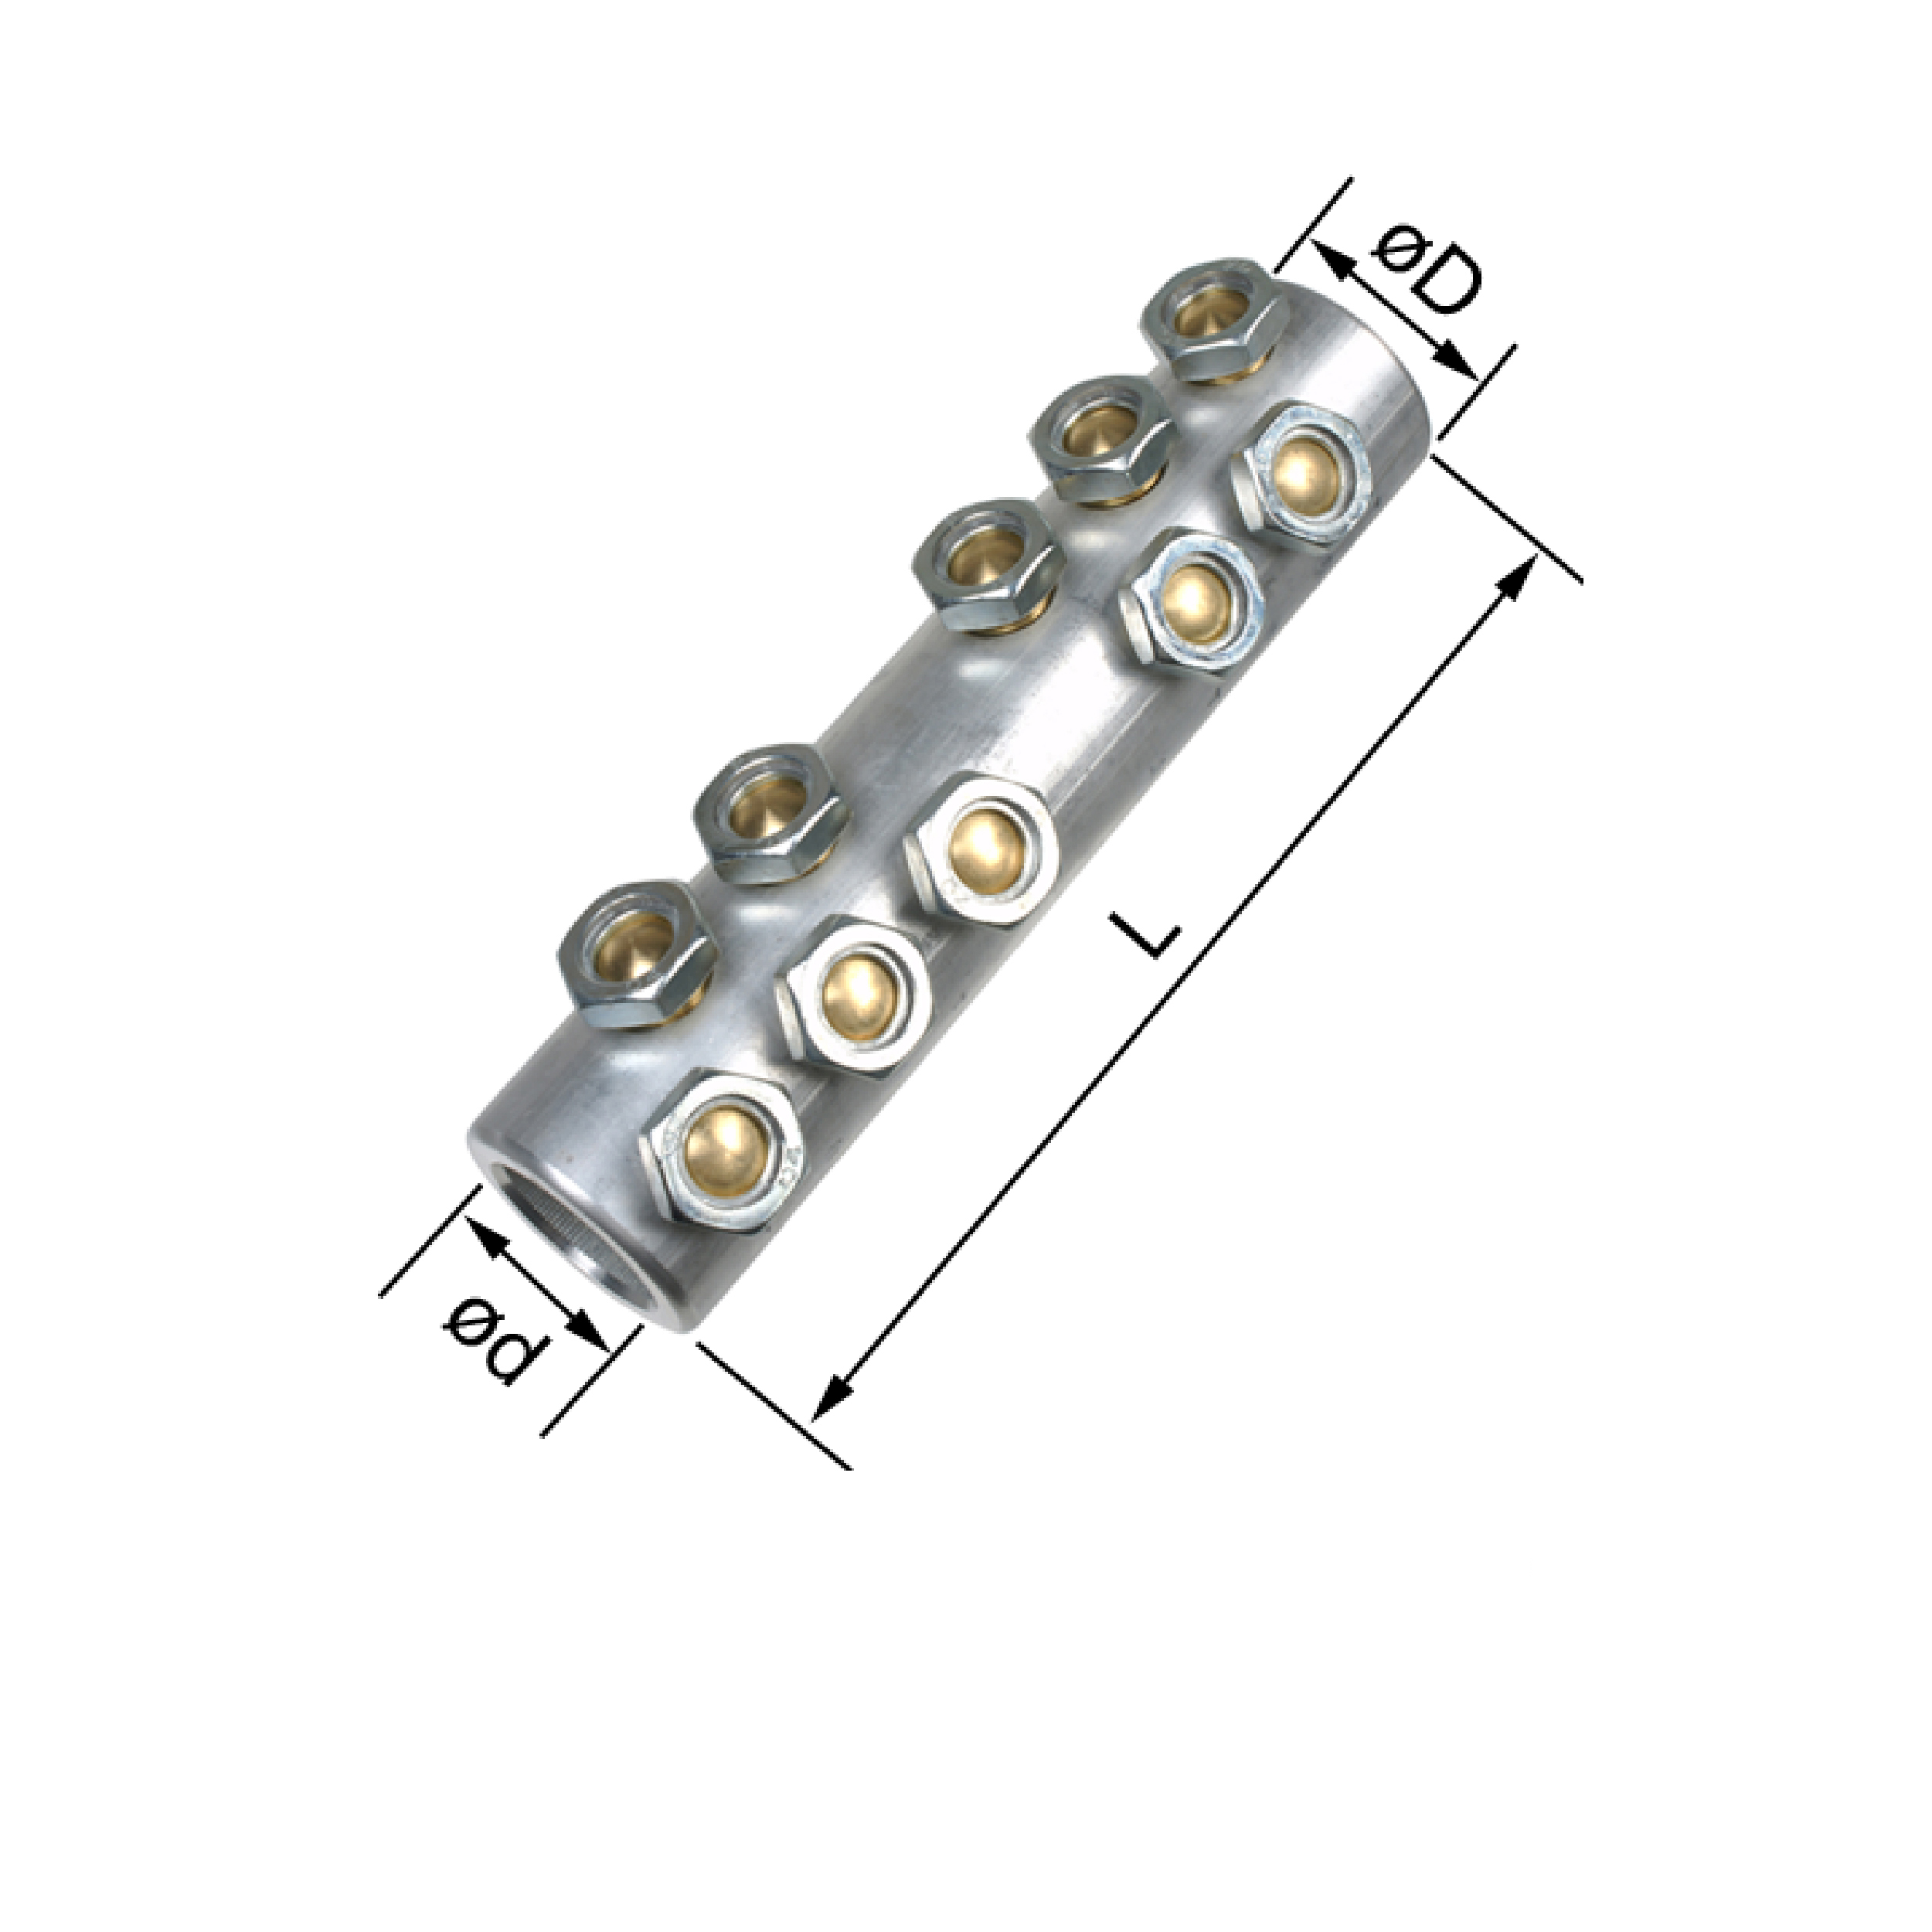 Elpress Shearbolt Connectors with reversible screw (10-630mm²)(SC95R95S, SC150R95S, SC240R185S, SC400R240S, SC630R)